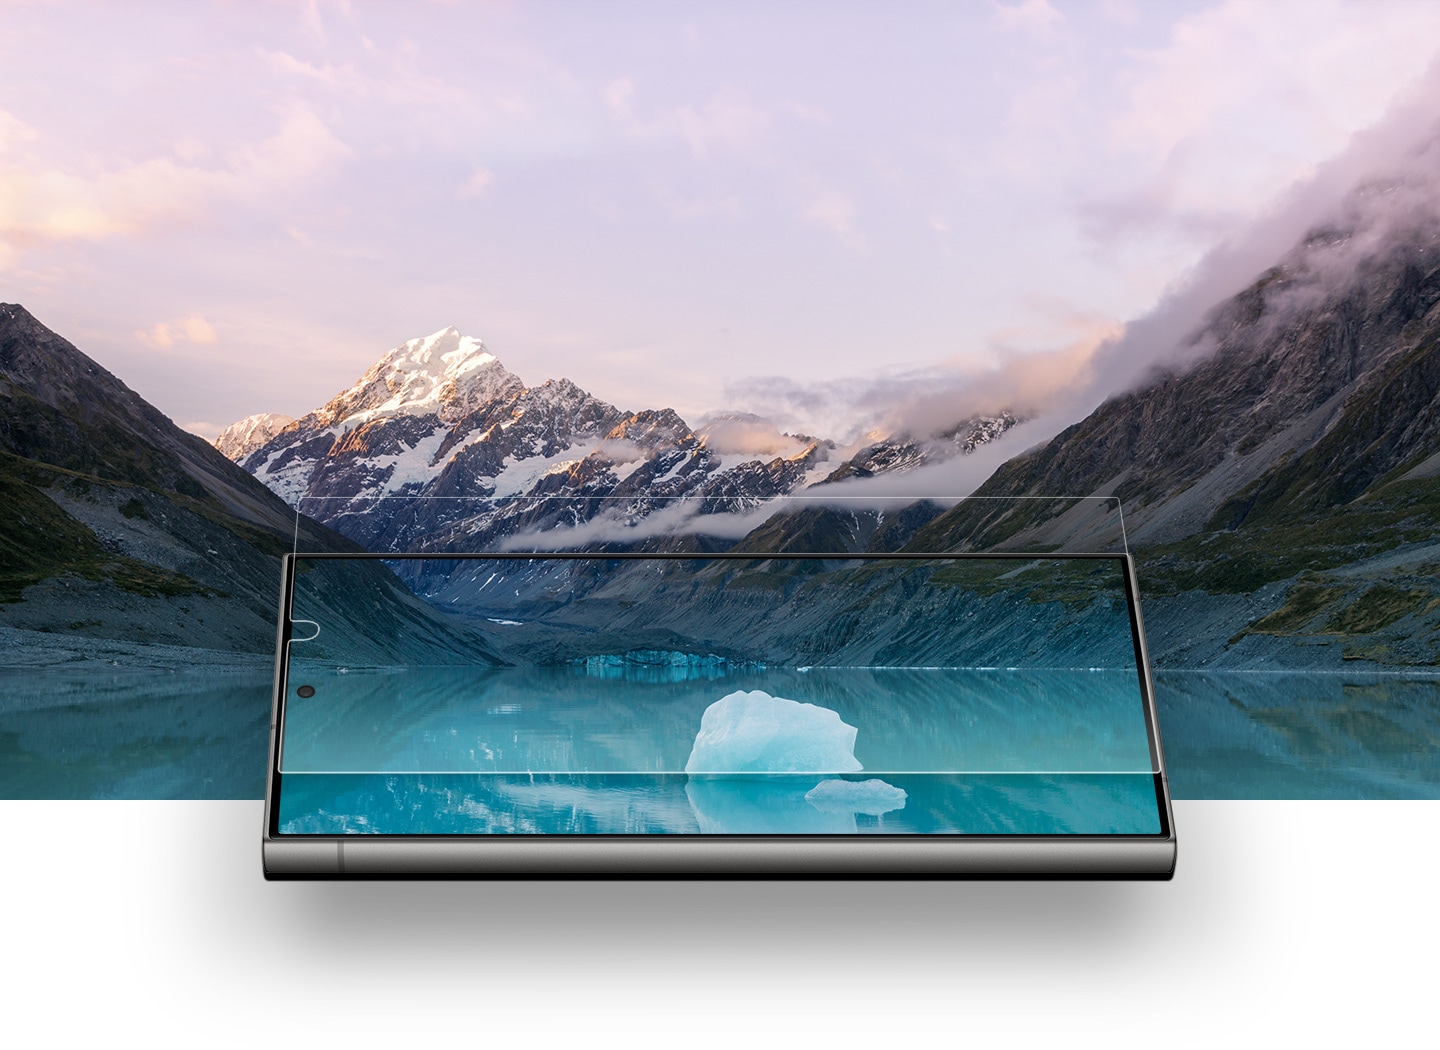 The Galaxy S24 Ultra with the Anti-Reflecting Screen Protector is overlaid on a snowy landscape of mountains and a lake. The clarity of the landscape can be seen through the lenses-like transparency of the screen protector.